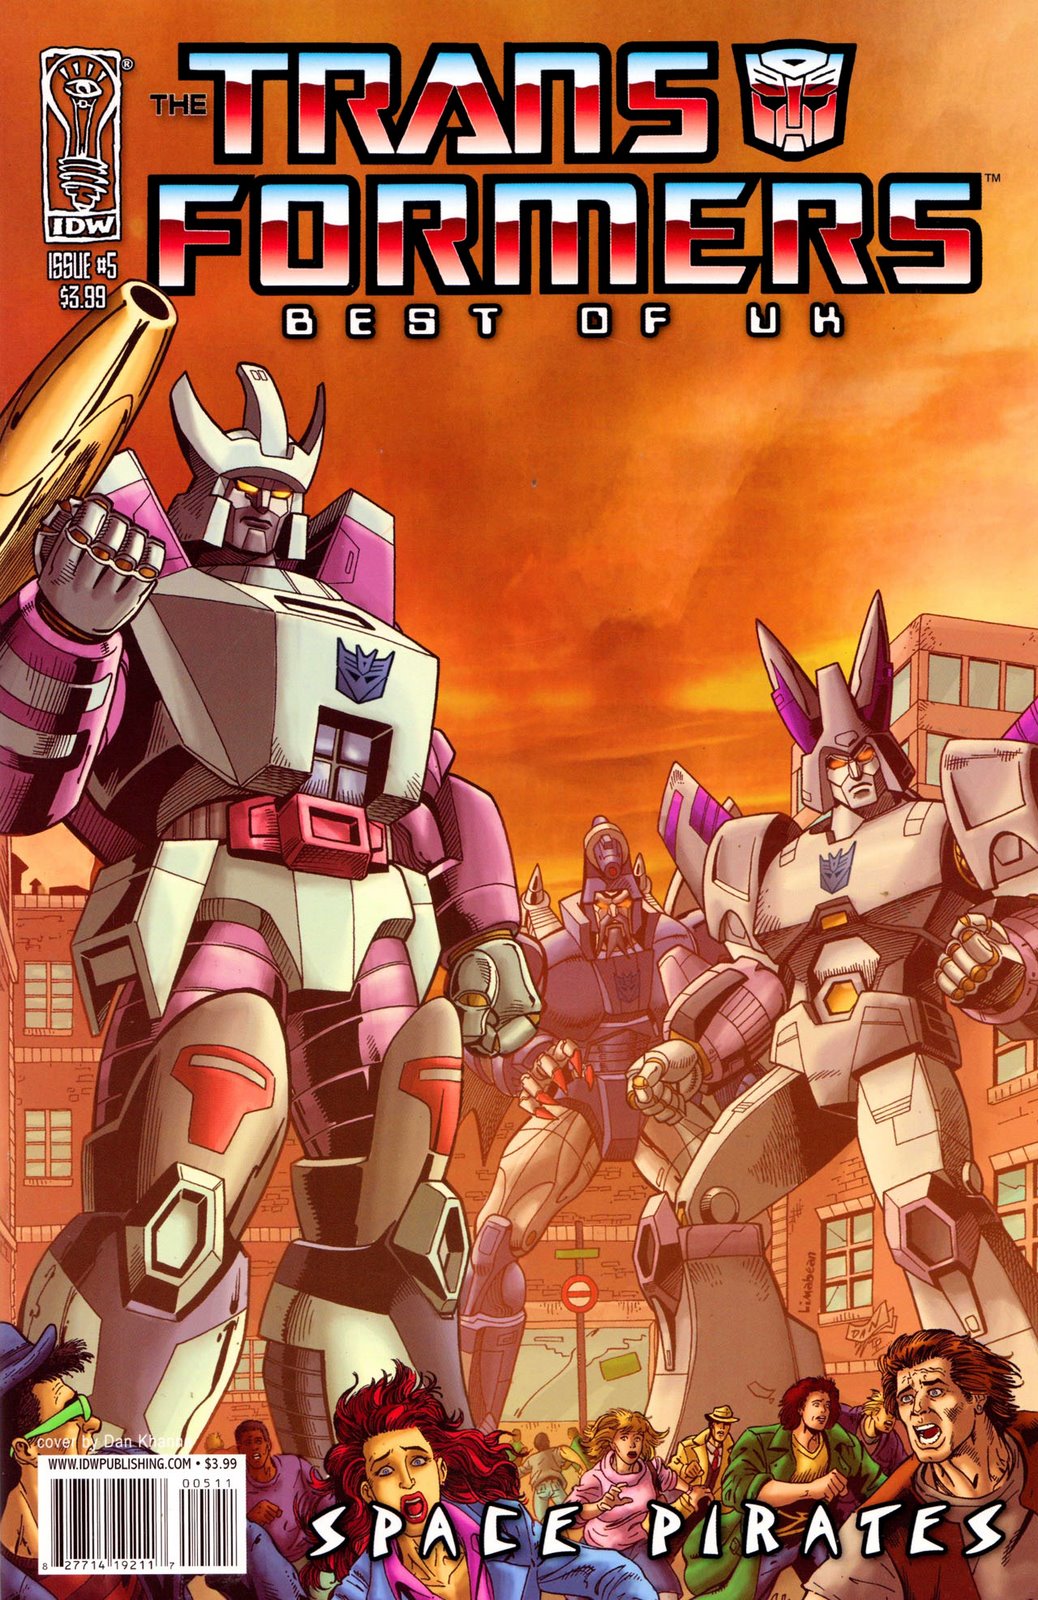 [Transformers+-+The+Best+of+UK+Space+Pirates+05+(of+5)+(2008)+(mi+001.jpg]